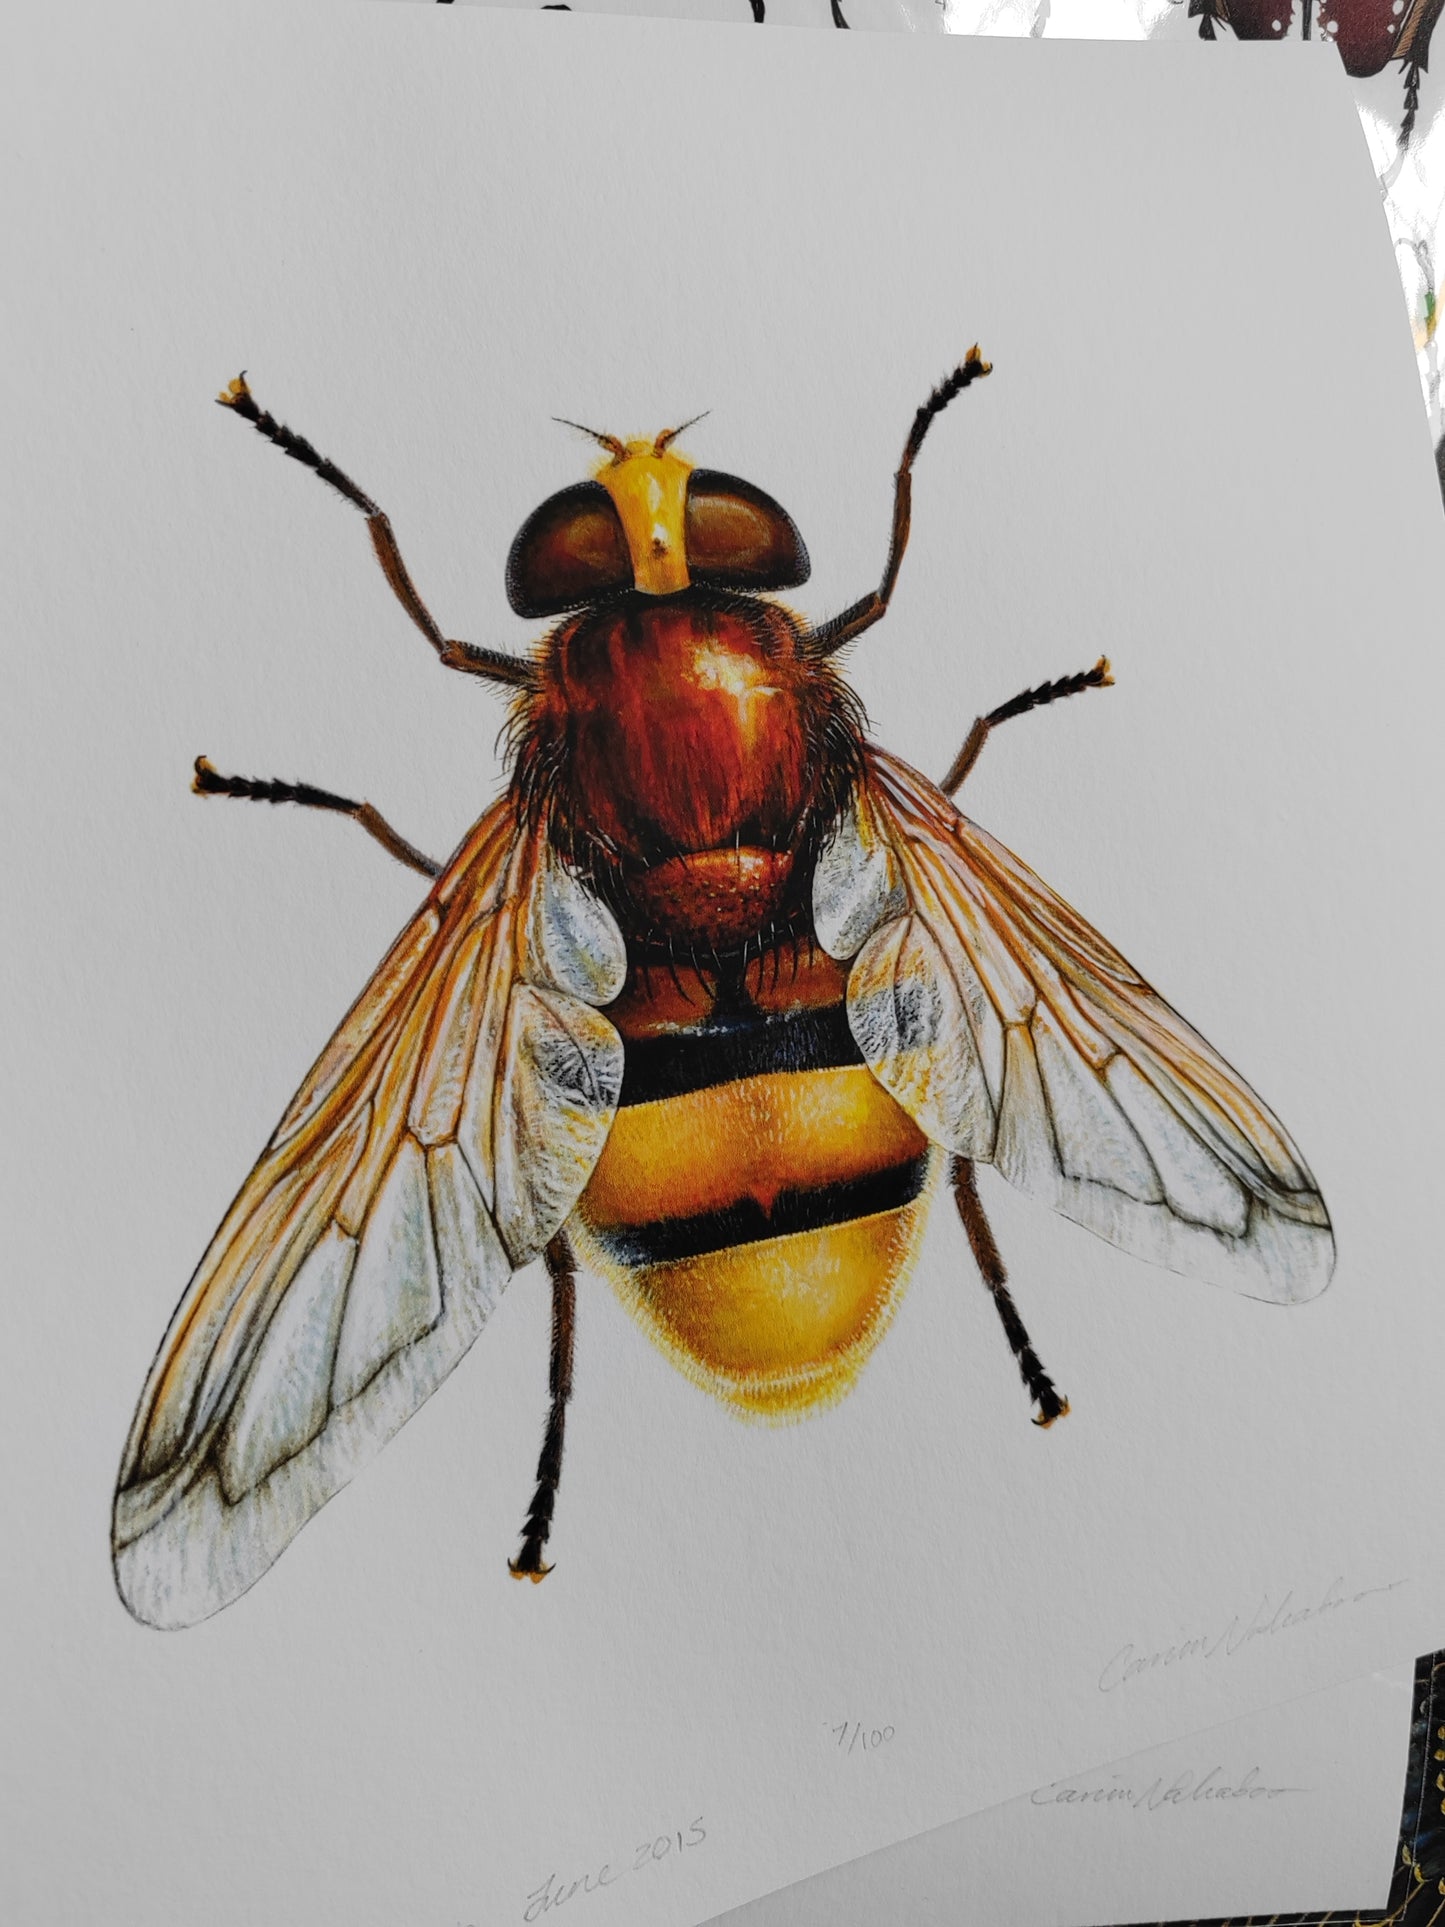 10x10" limited edition art print Volucella zonaria, Hornet mimic hoverfly